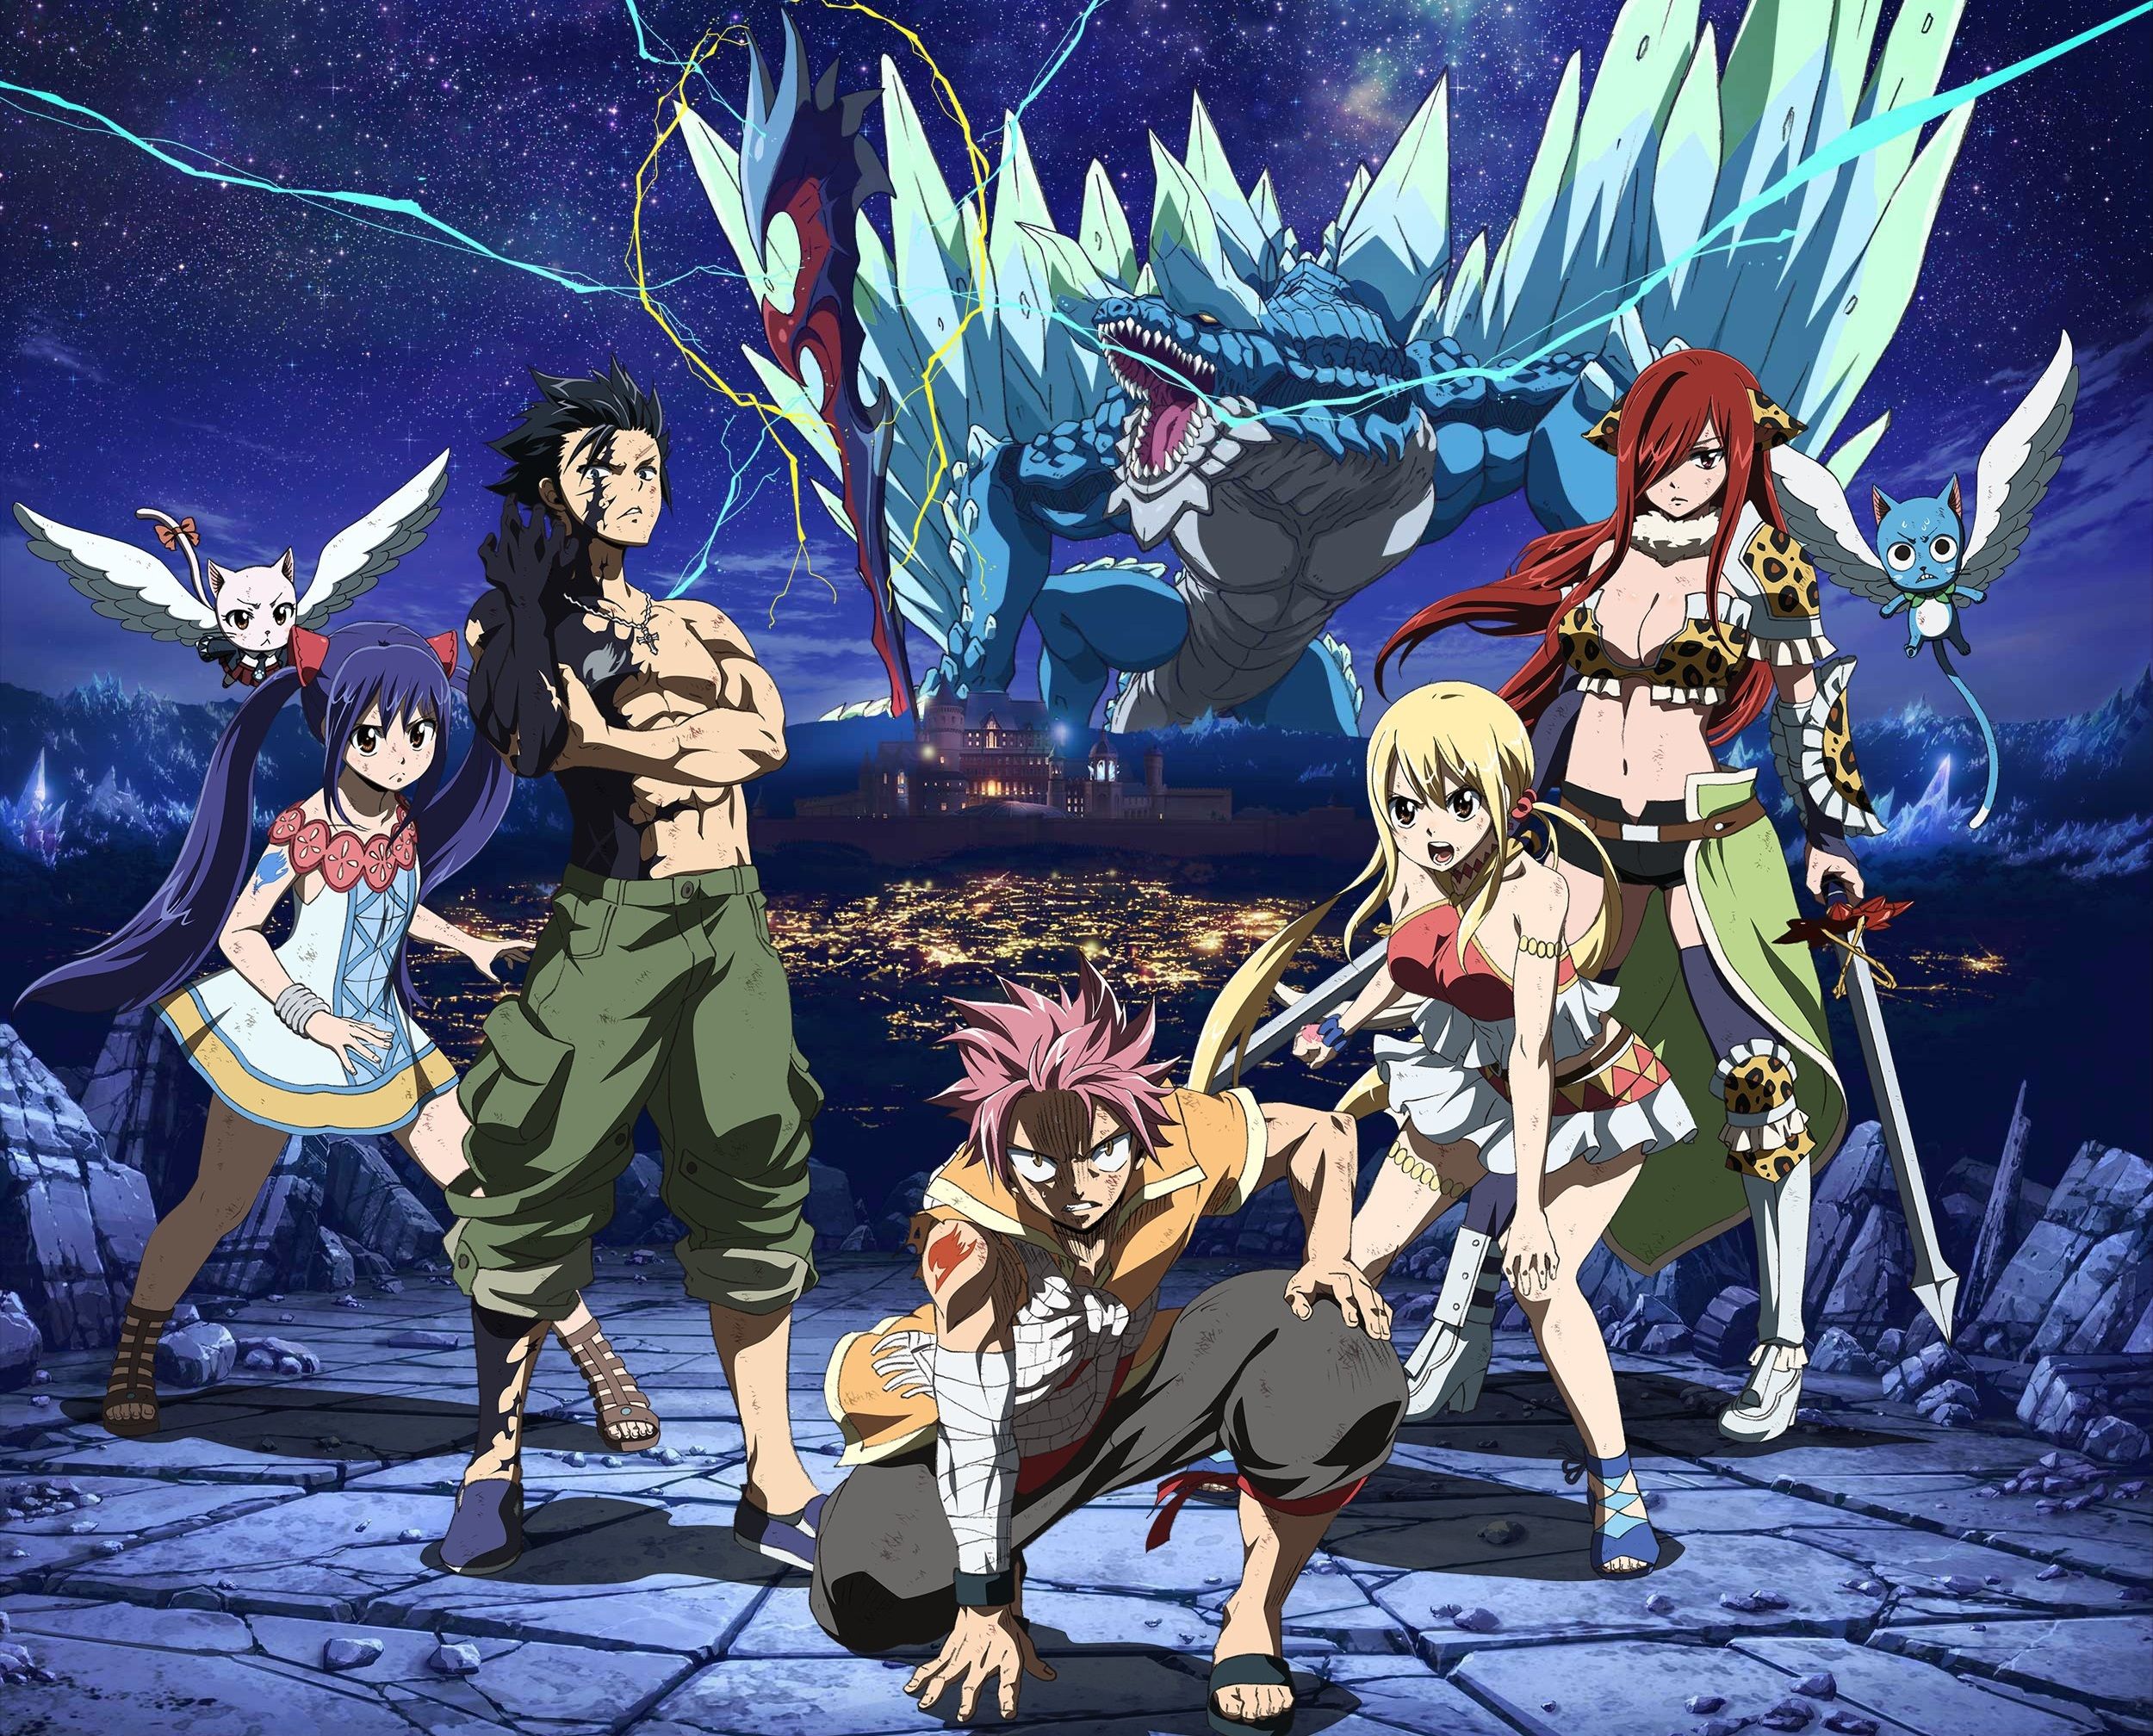 Fairy Tail HD Wallpaper Tail Dragon Cry is HD wallpaper & background for desktop or mobile devic. Fairy tail movie, Fairy tail, Fairy tail dragon slayer